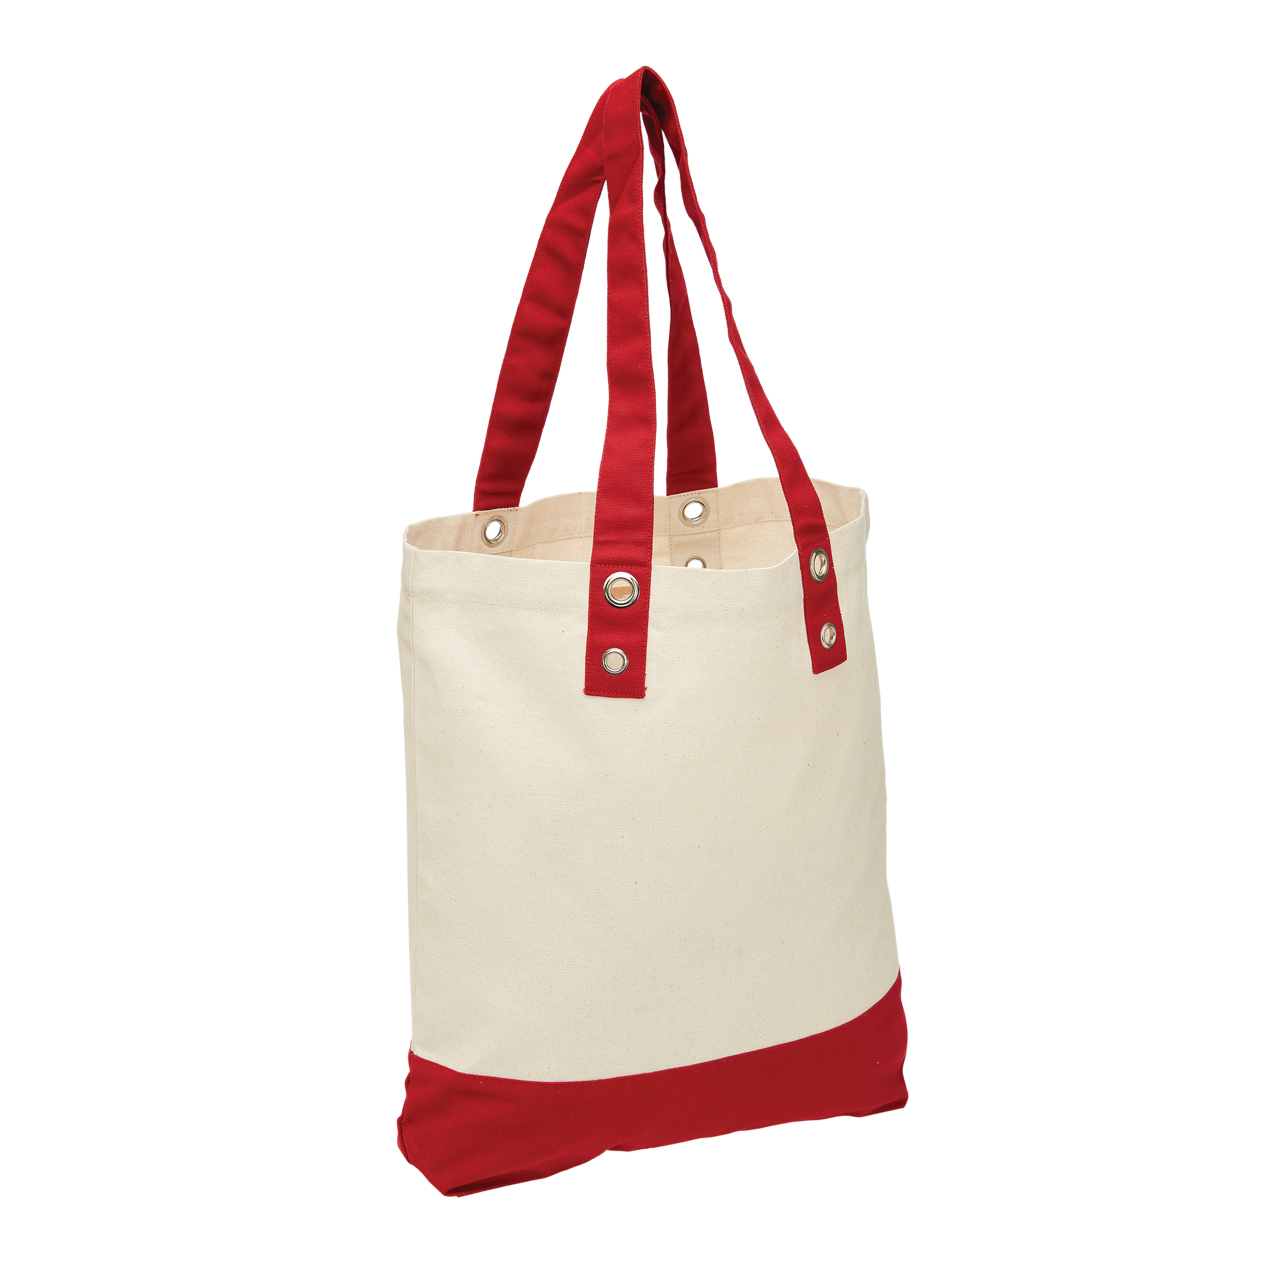 Promotional Canvas Beach Tote Bags: Branded Online | Promotion Products